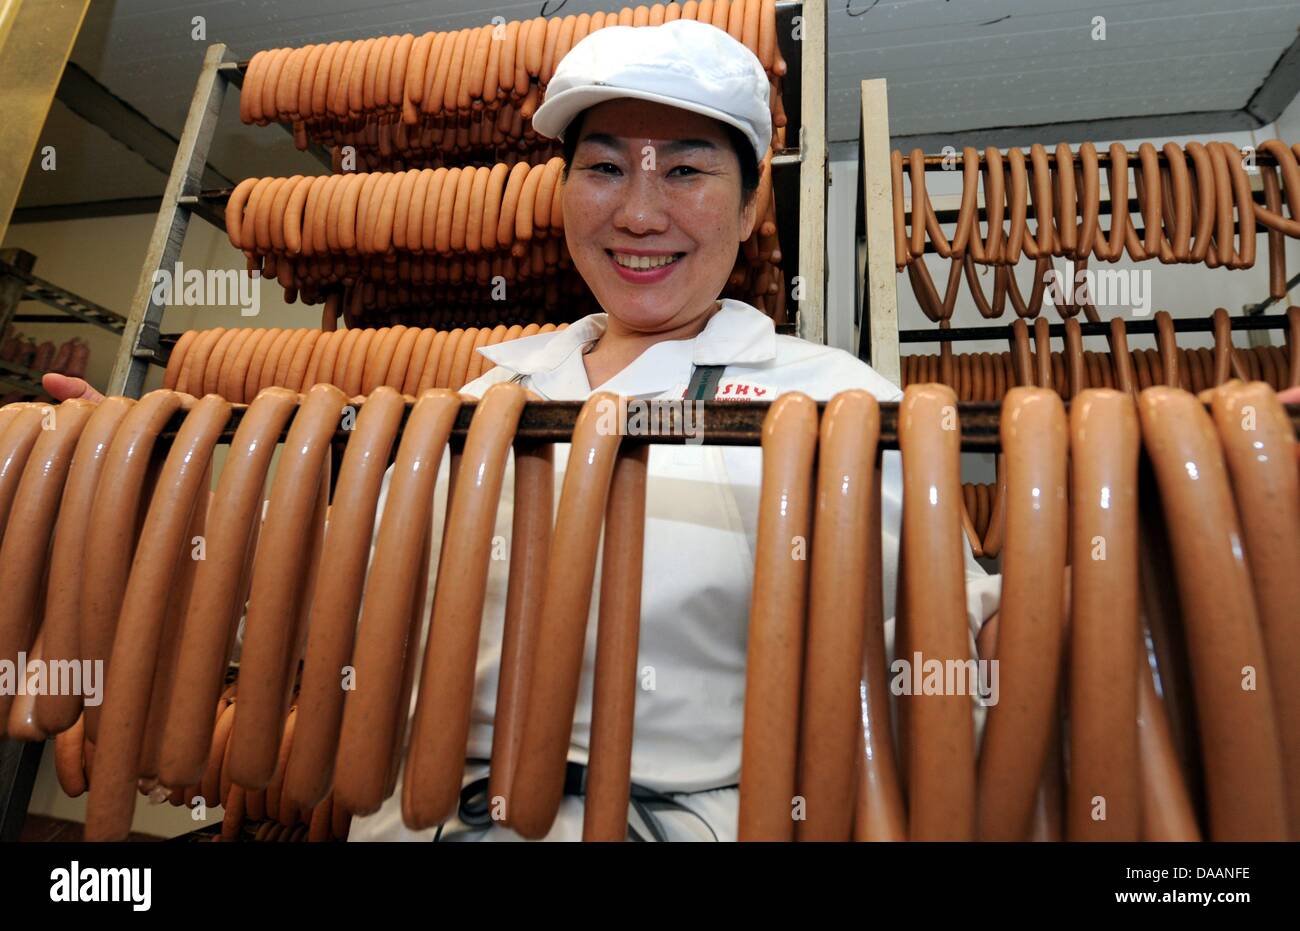 Korean Kui Kyung Lee smiles next to sausages in Bredstedt, Germany, 31 January 2011. Lee leads a facility for challenged people in South Korea and produces there about half-a-dozen kinds of sausages from pork, veal, and beef. Currently, Lee serves an internship at a northern German sausage producer. Photo: Carsten Rehder Stock Photo